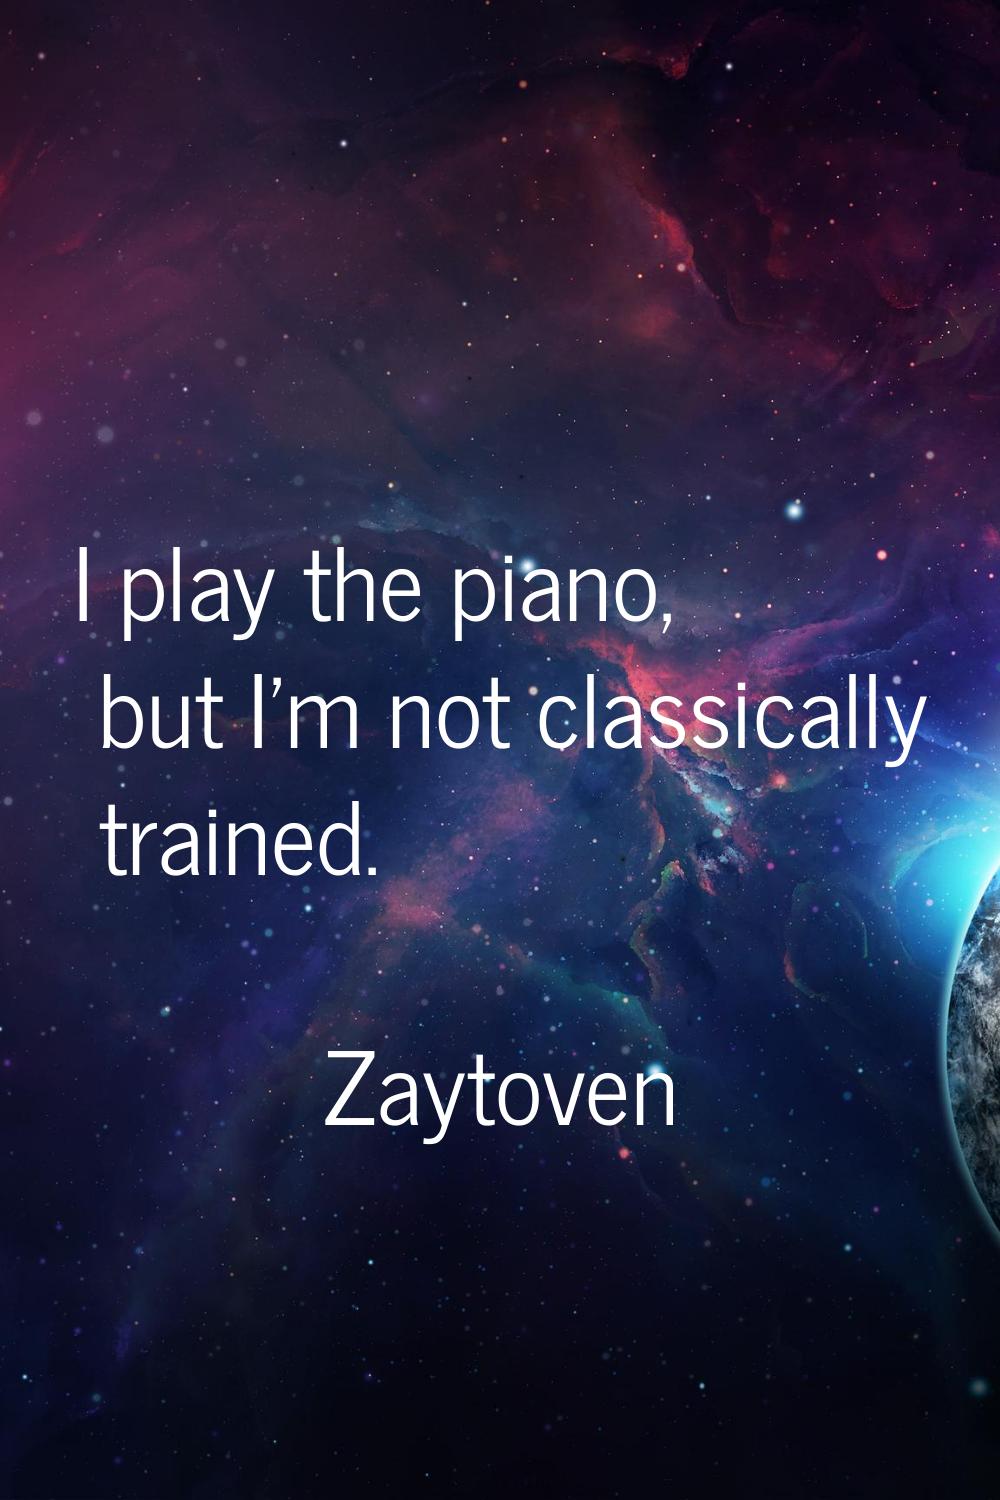 I play the piano, but I'm not classically trained.